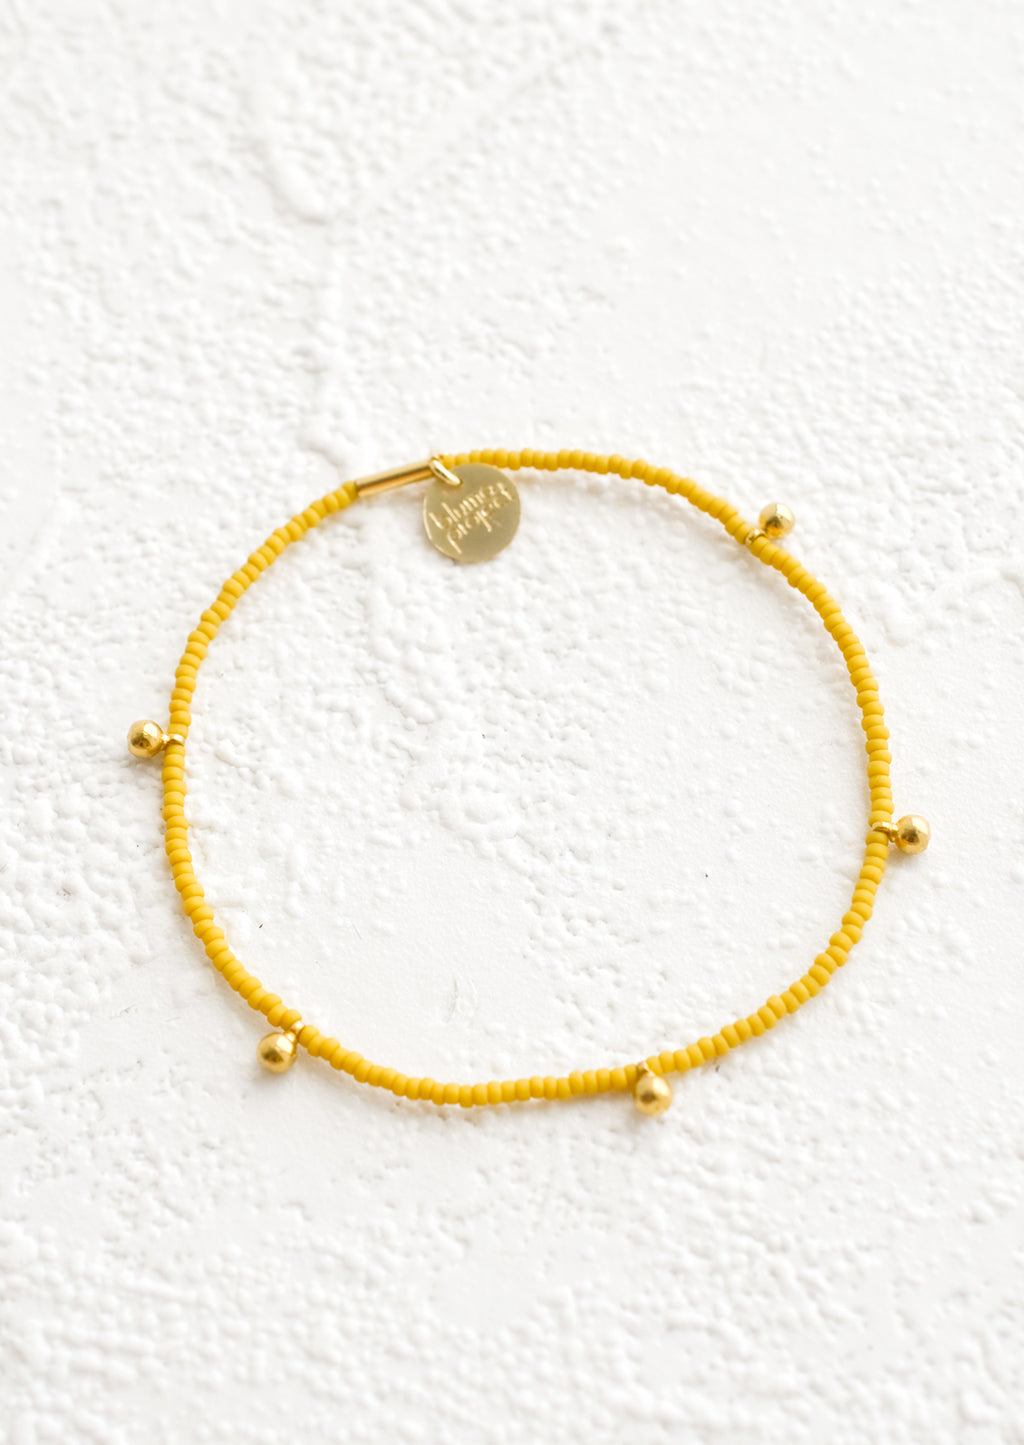 Mustard: Bracelet made from mustard colored glass seed beads with brass ball accent charms and logo tag